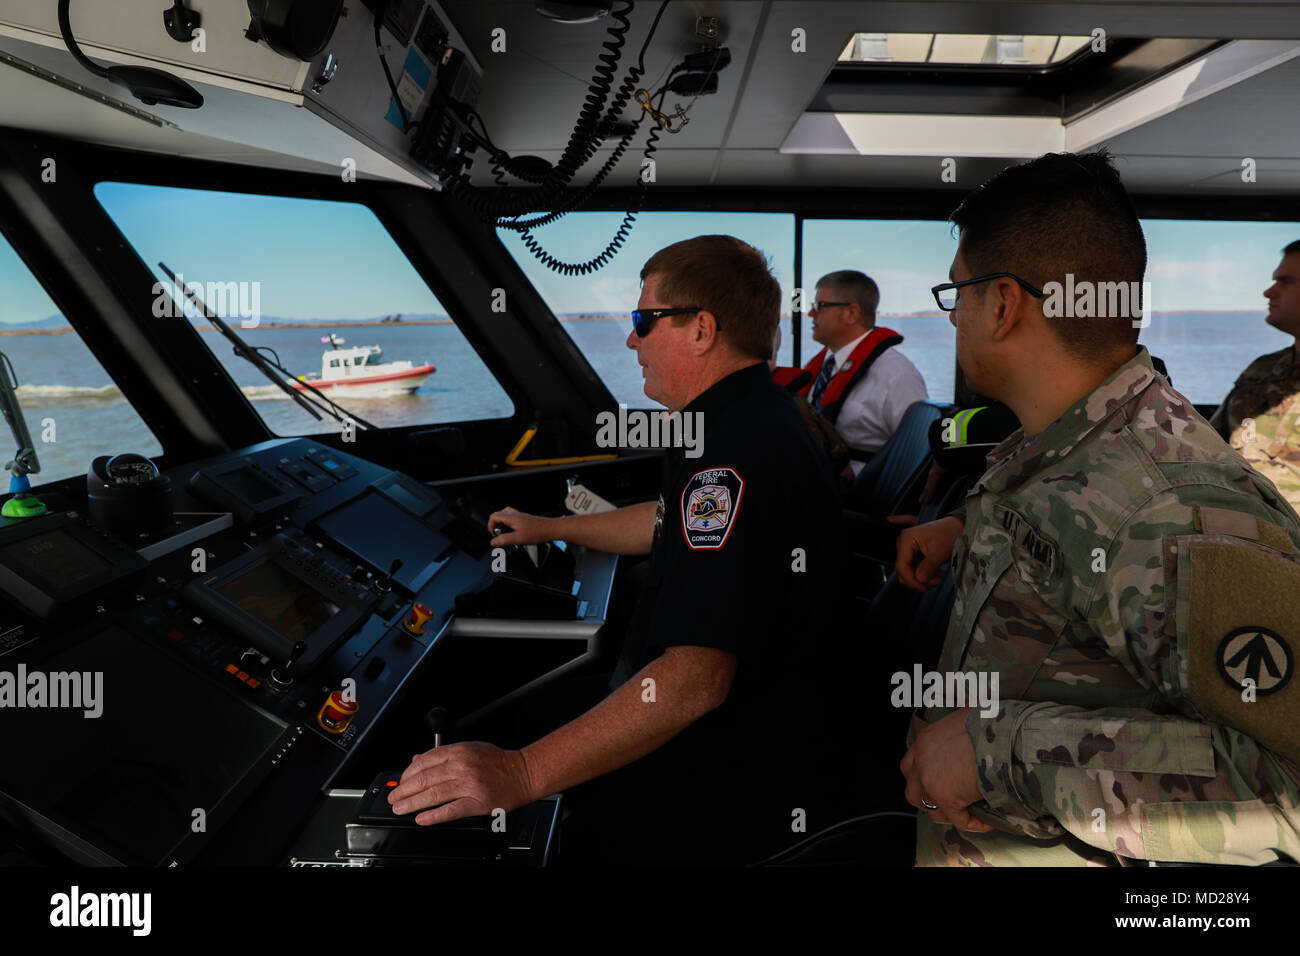 A pier-side firefighter drives one of two U.S. Army fire boats during Operation Trans Mariner 18 West at Military Ocean Terminal Concord, California, Mar. 6, 2018. Trans Mariner 18 West is a real-world strategic mission utilizing U.S. Army Reserve, National Guard and Active component Soldiers to conduct Port Operations allowing Army materiel and munitions containers for travel onward.    (U.S. Army photo by Sgt. Eben Boothby) Stock Photo